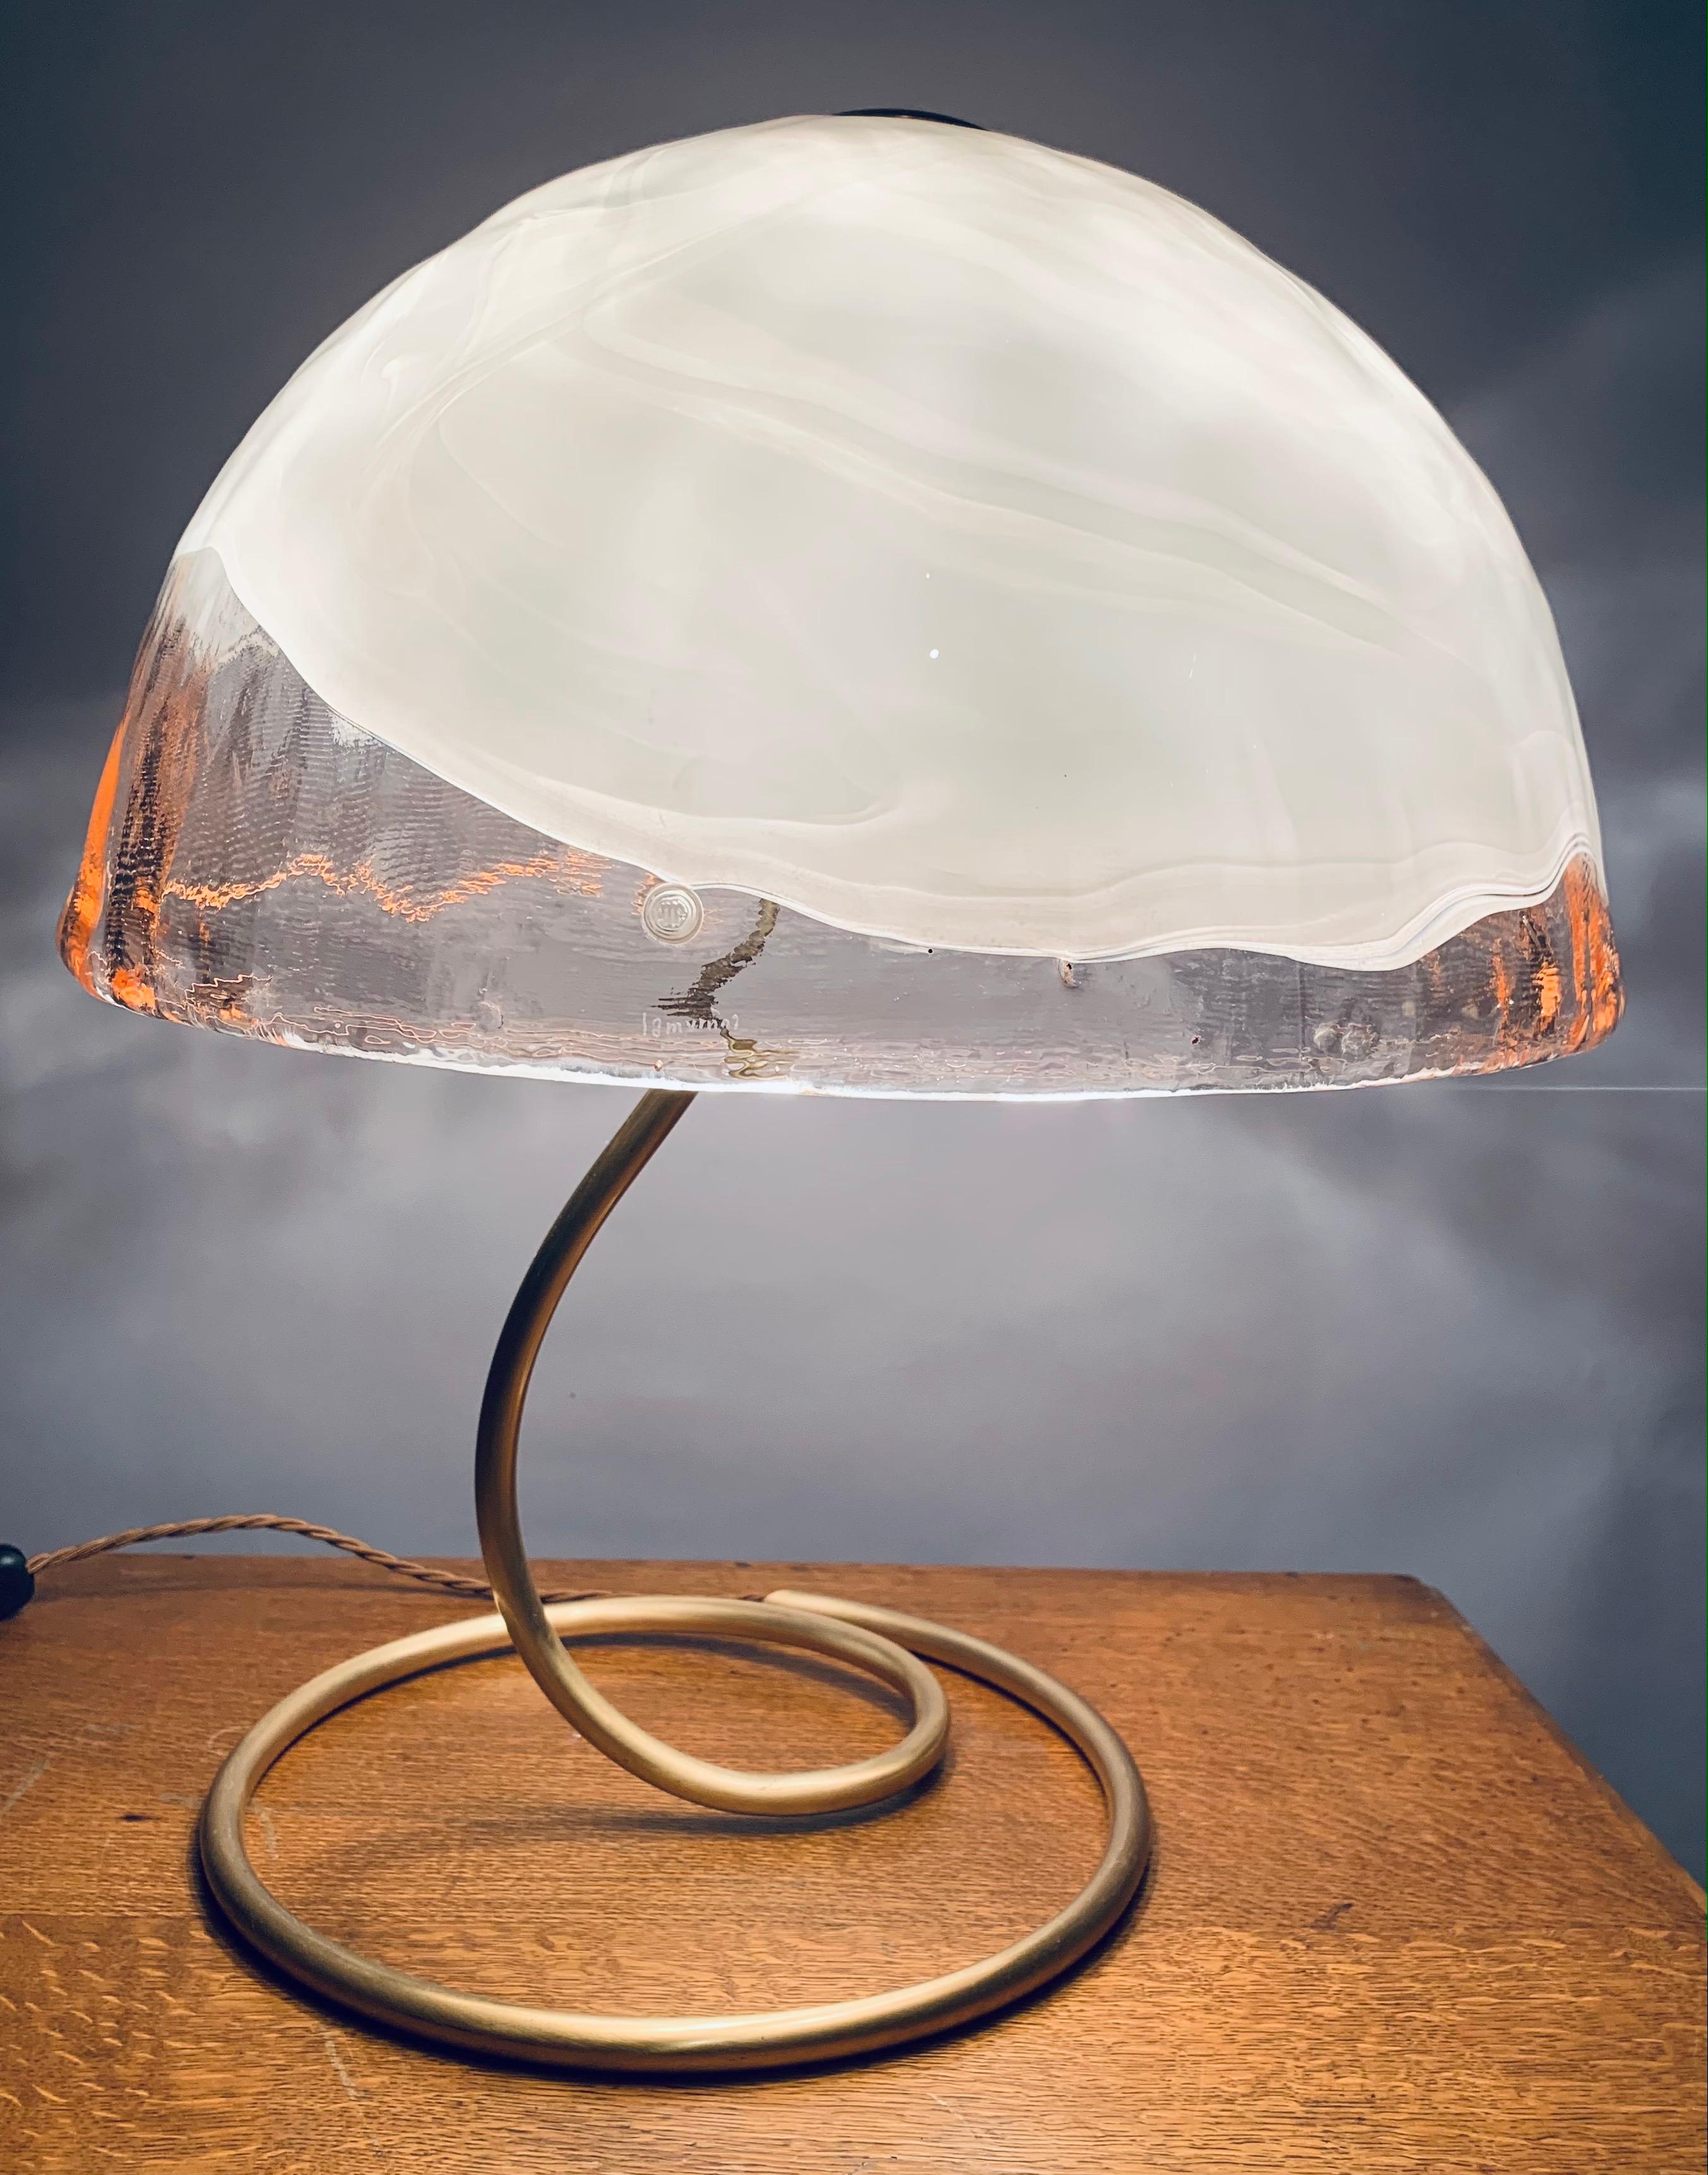 A striking and unusual 1970s Italian, La Murrina, Murano glass, mushroom, domed table lamp with a polished brass flexible snaked base. The striking thick Murano salmon, white and clear glass shade is secured onto the base with a large button shaped